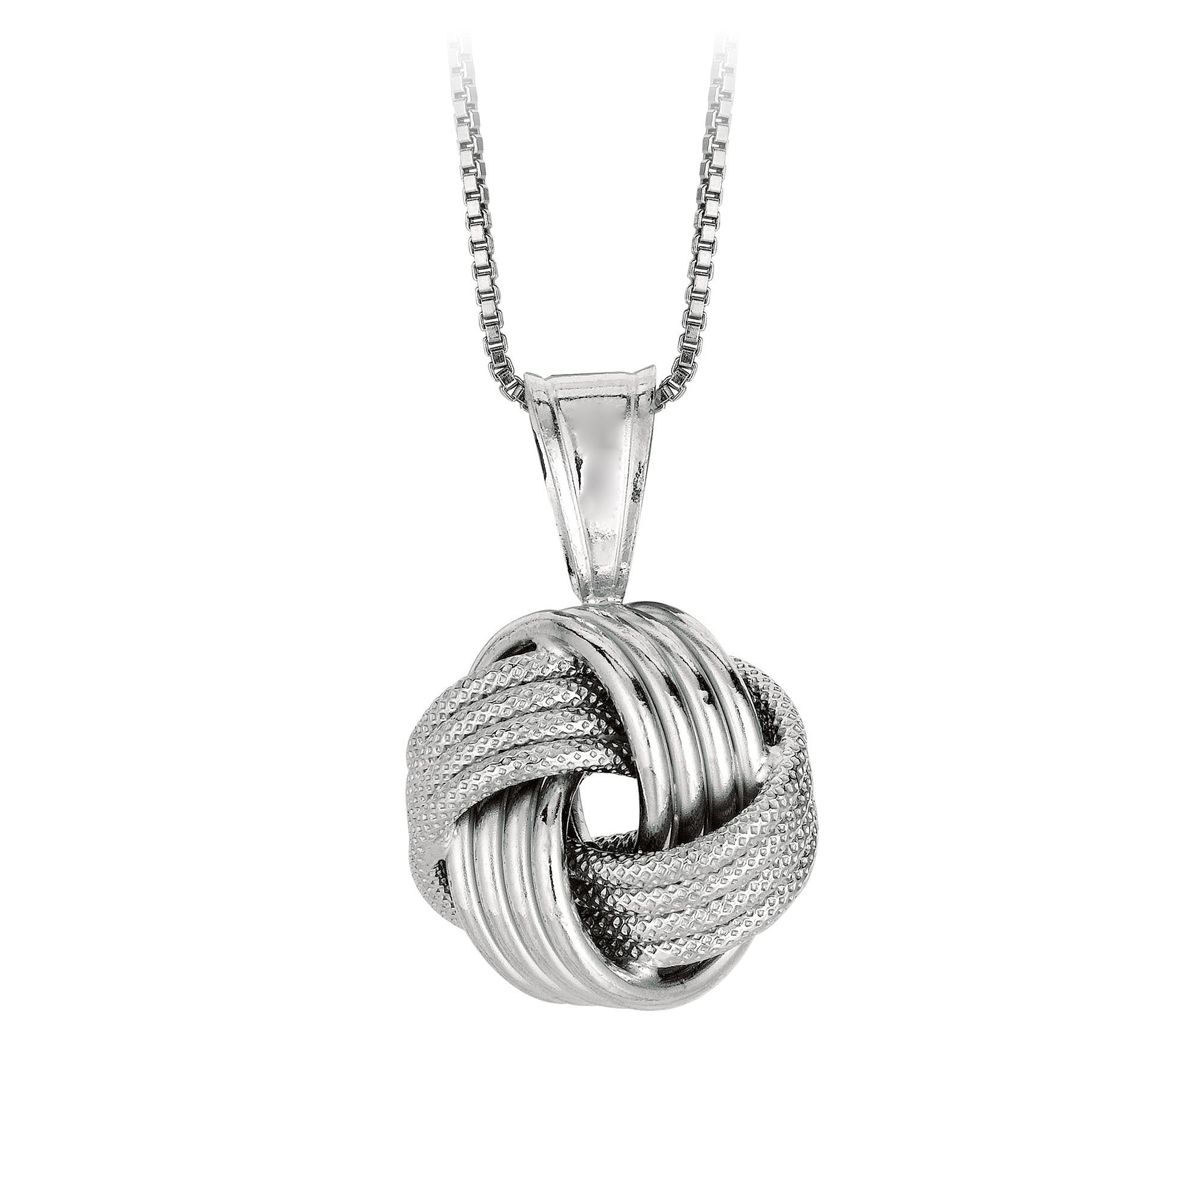 Royal Chain Sterling Silver 4 Row Love Knot Pendant Necklace